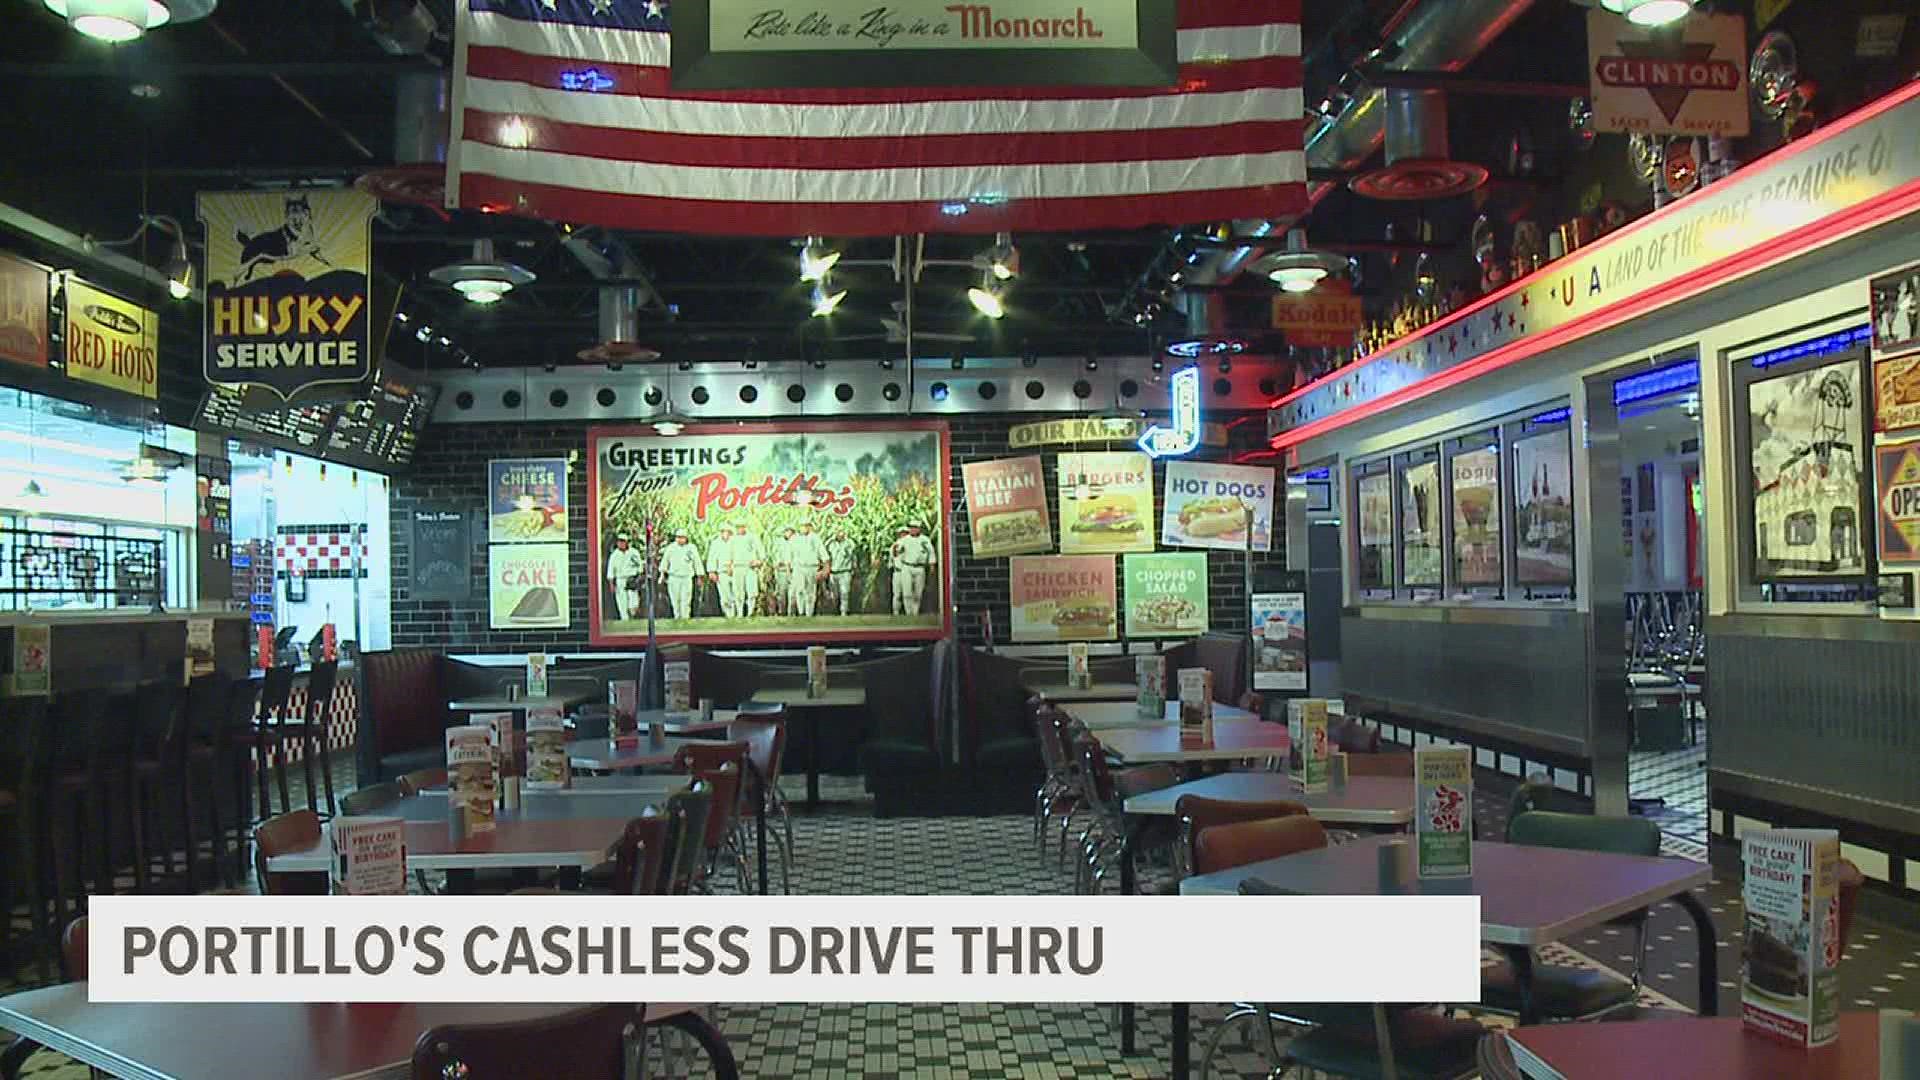 Portillo's will soon only take credit or debit in drive-throughs. The restaurant says it'll be safer for their employees. Cash will still be accepted for diners.